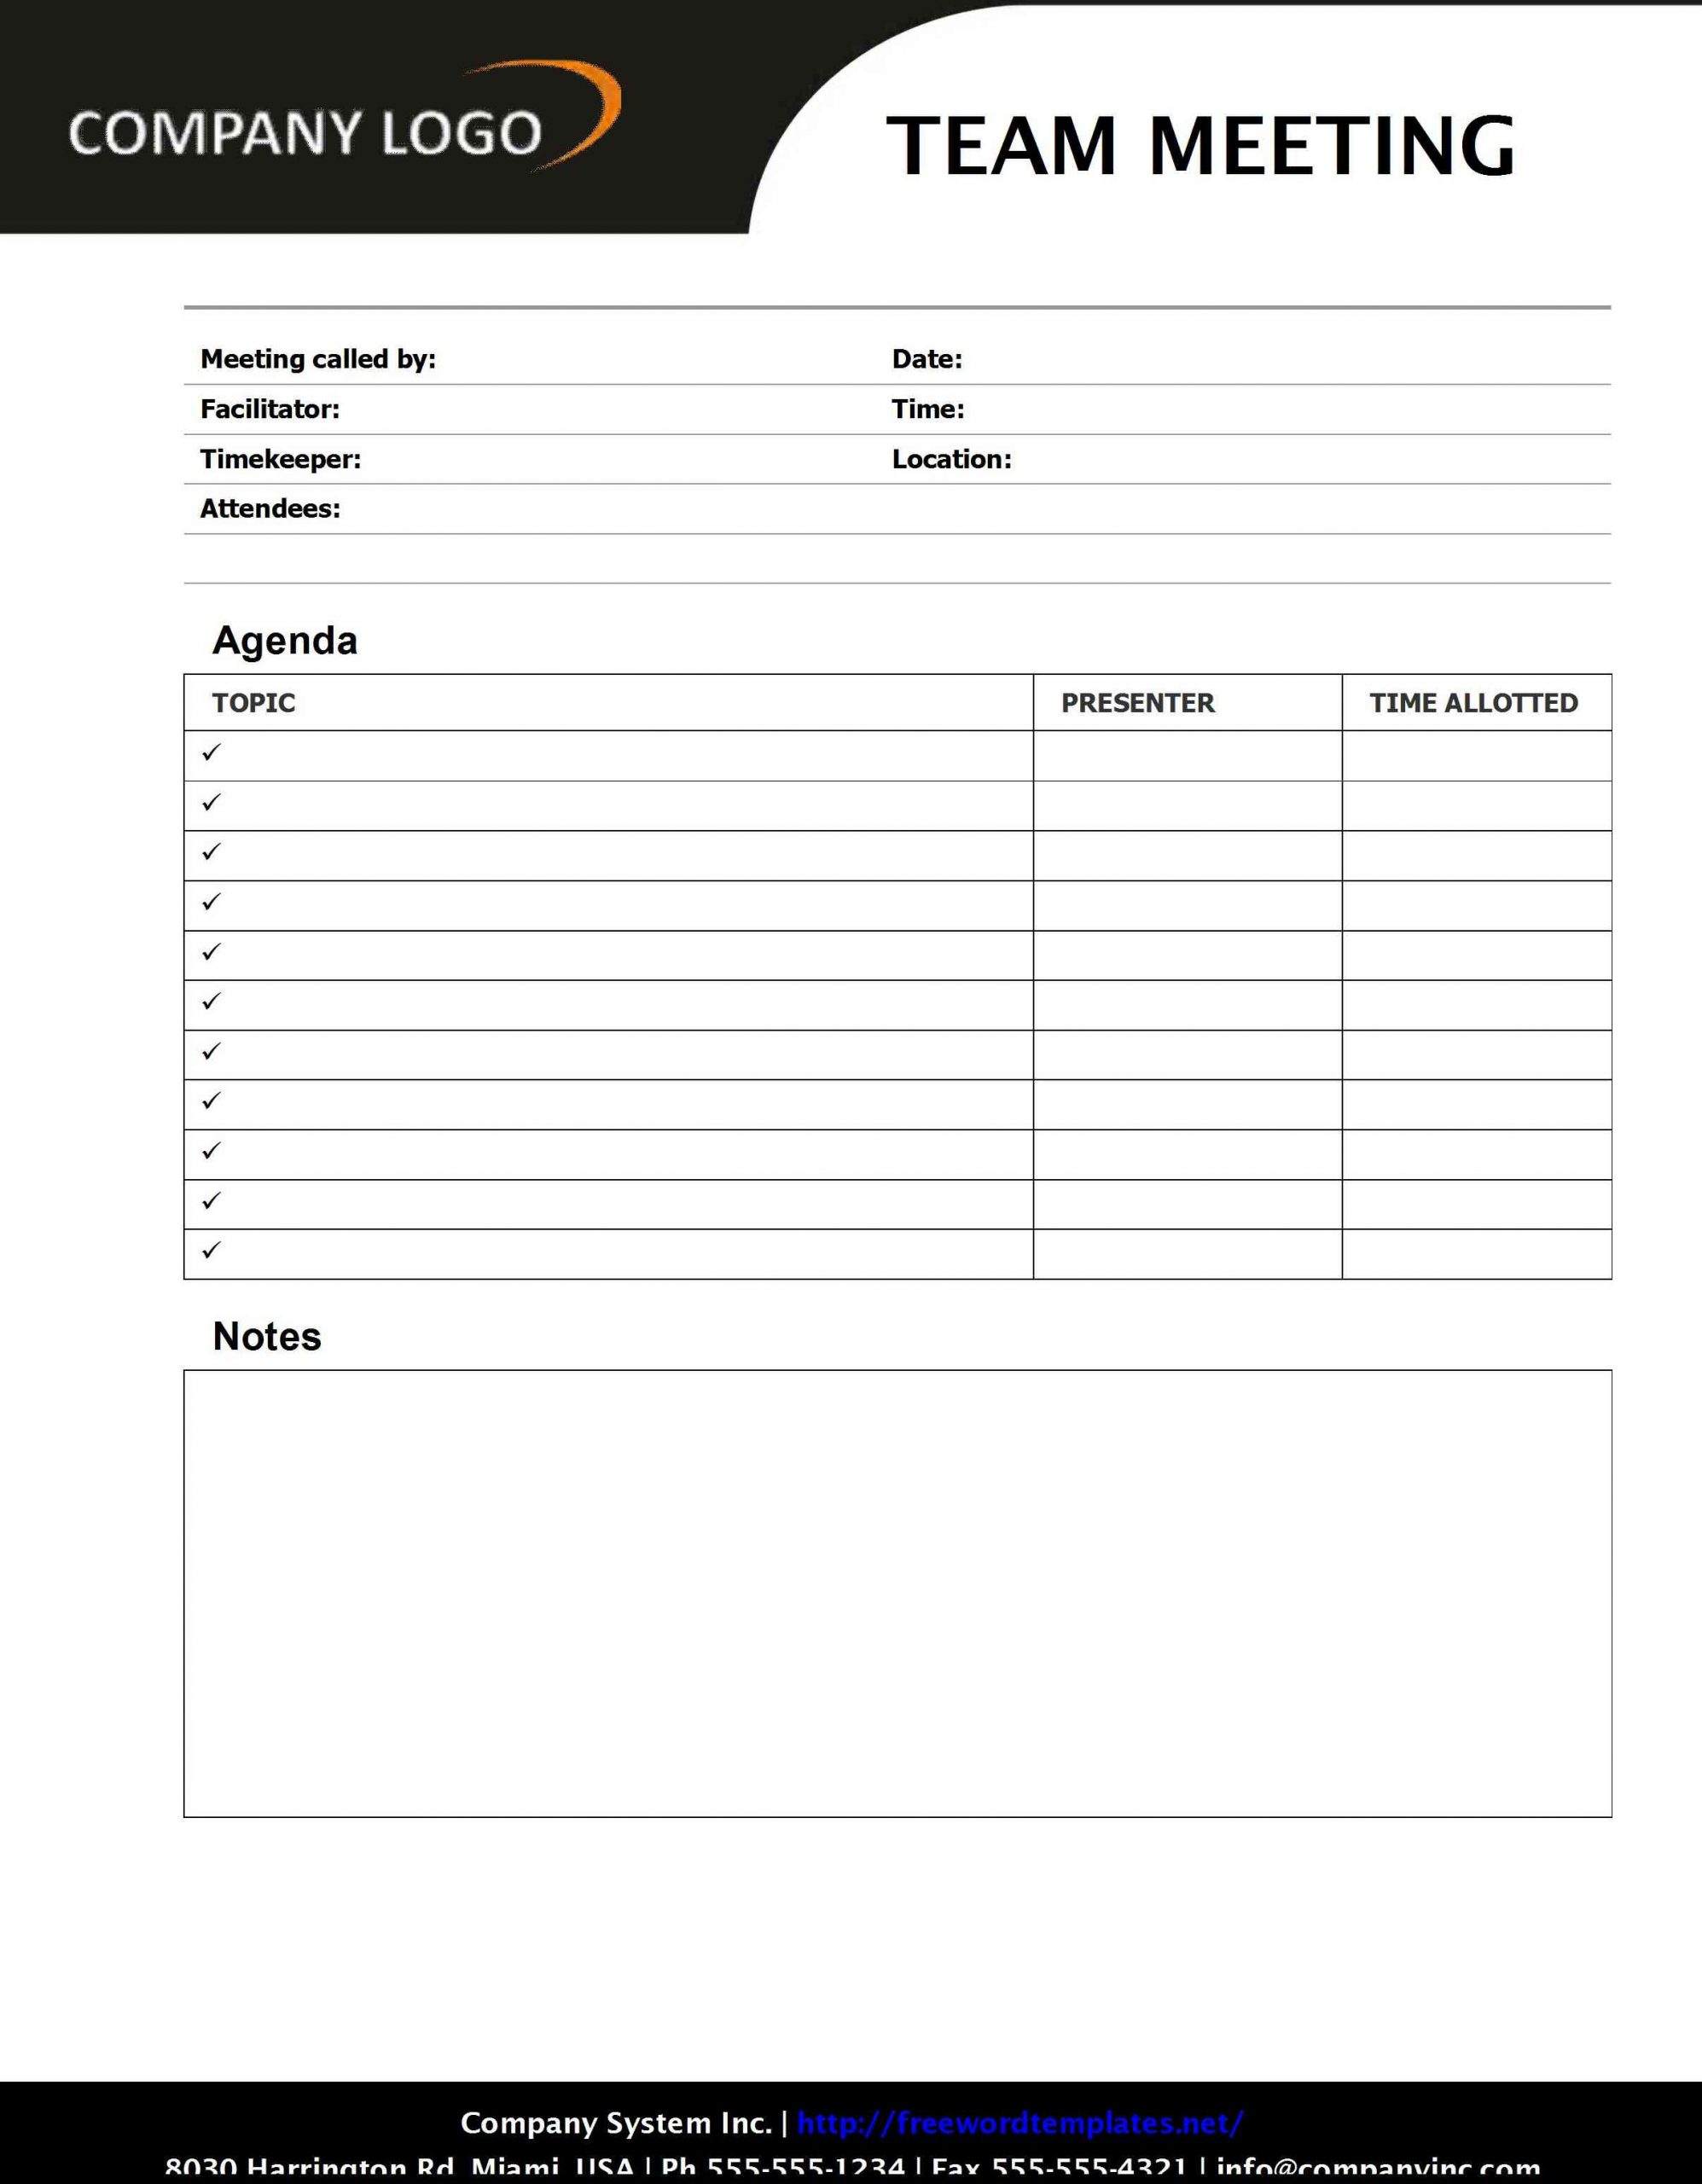 This Is A Team Meeting Agenda Template Which Will Guide You inside measurements 2414 X 3097